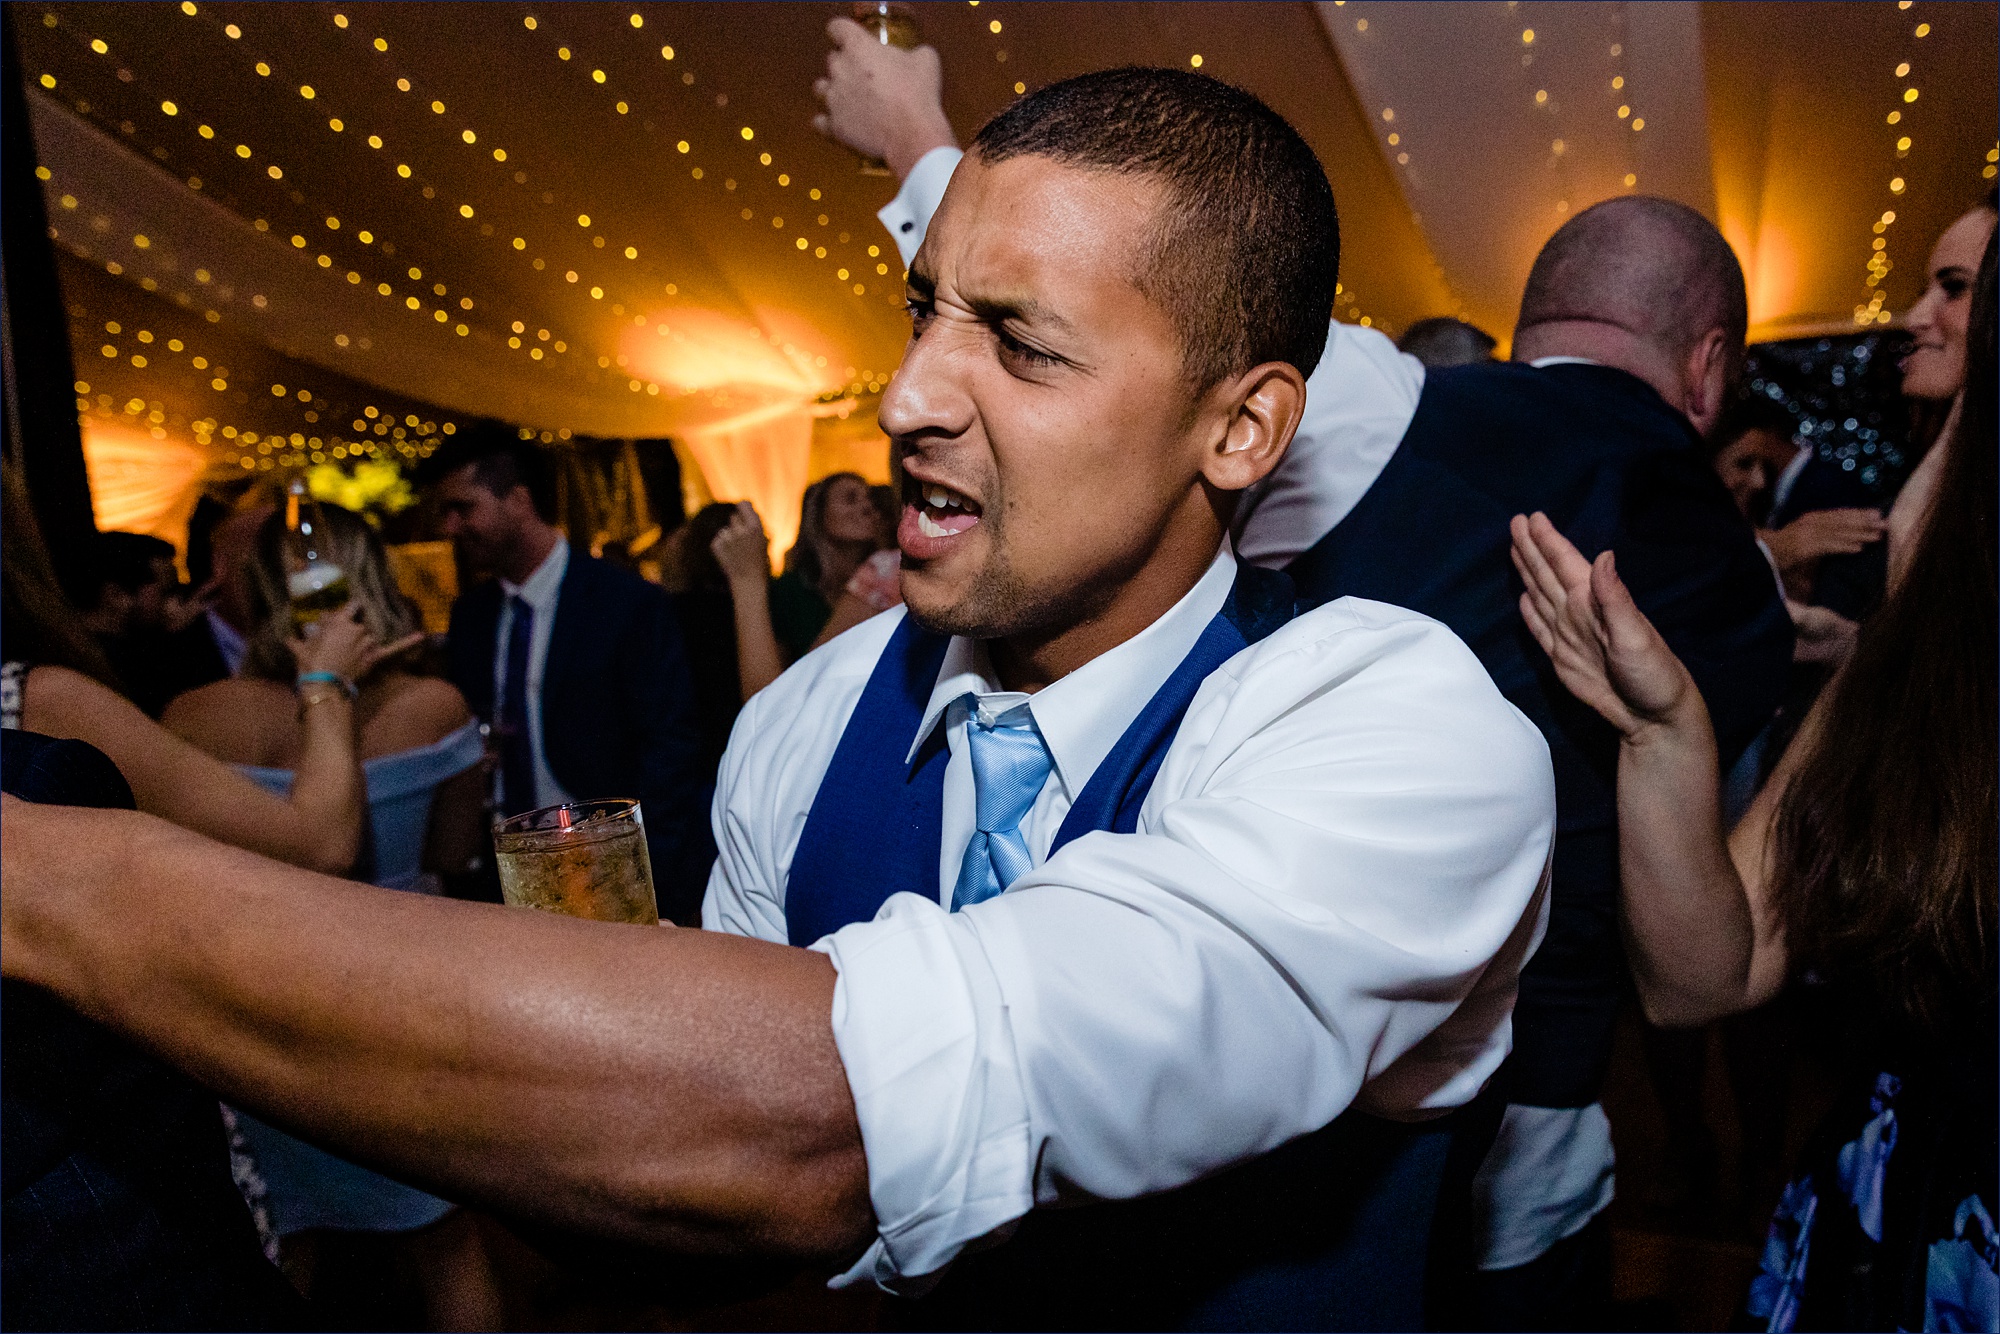 Guests get into the music at the Maine wedding reception